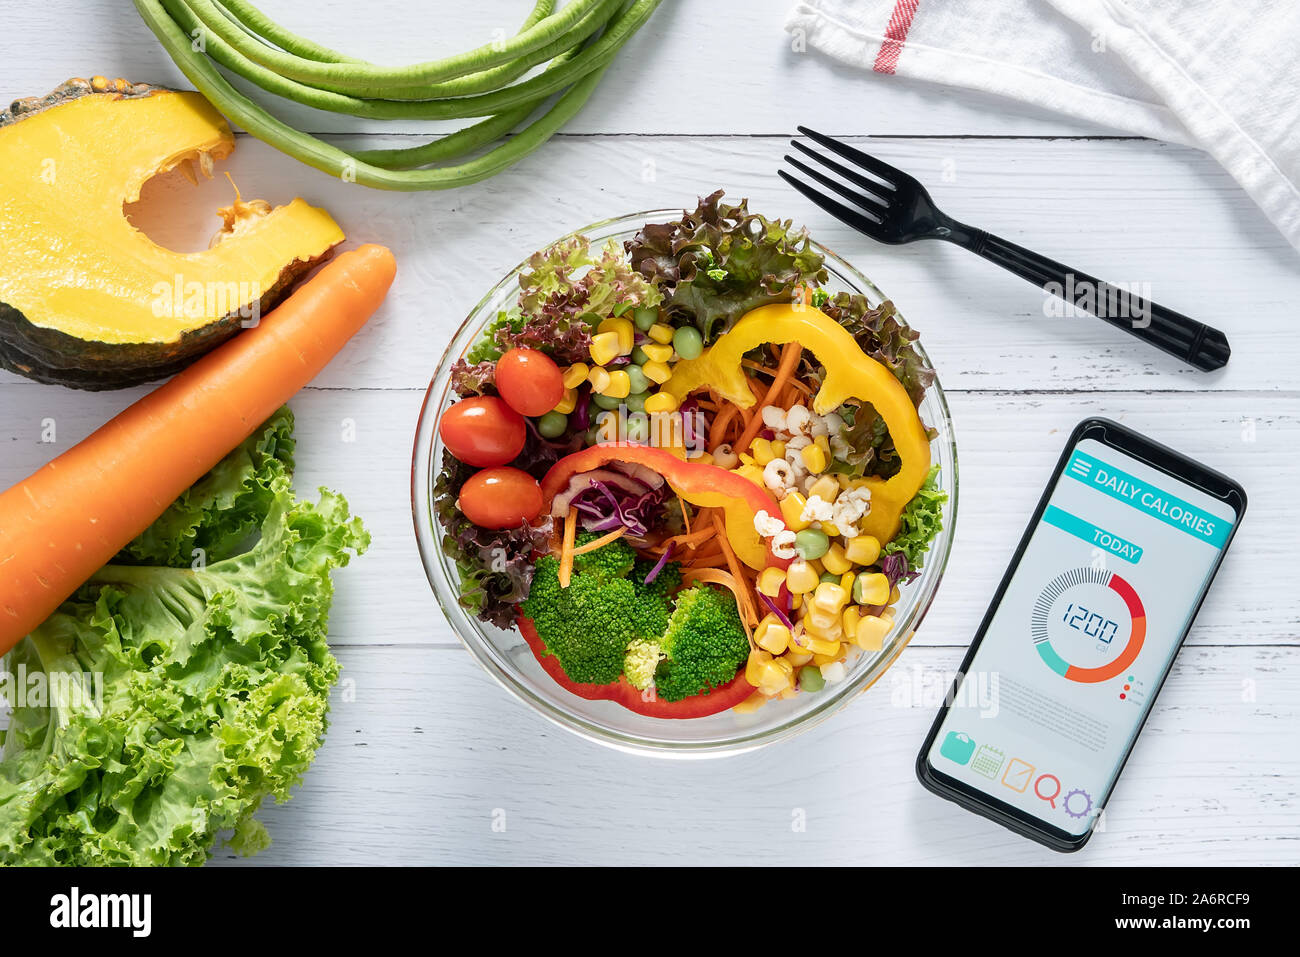 Calories counting , diet , food control and weight loss concept. Calorie counter application on smartphone screen at dining table with salad, fruit ju Stock Photo